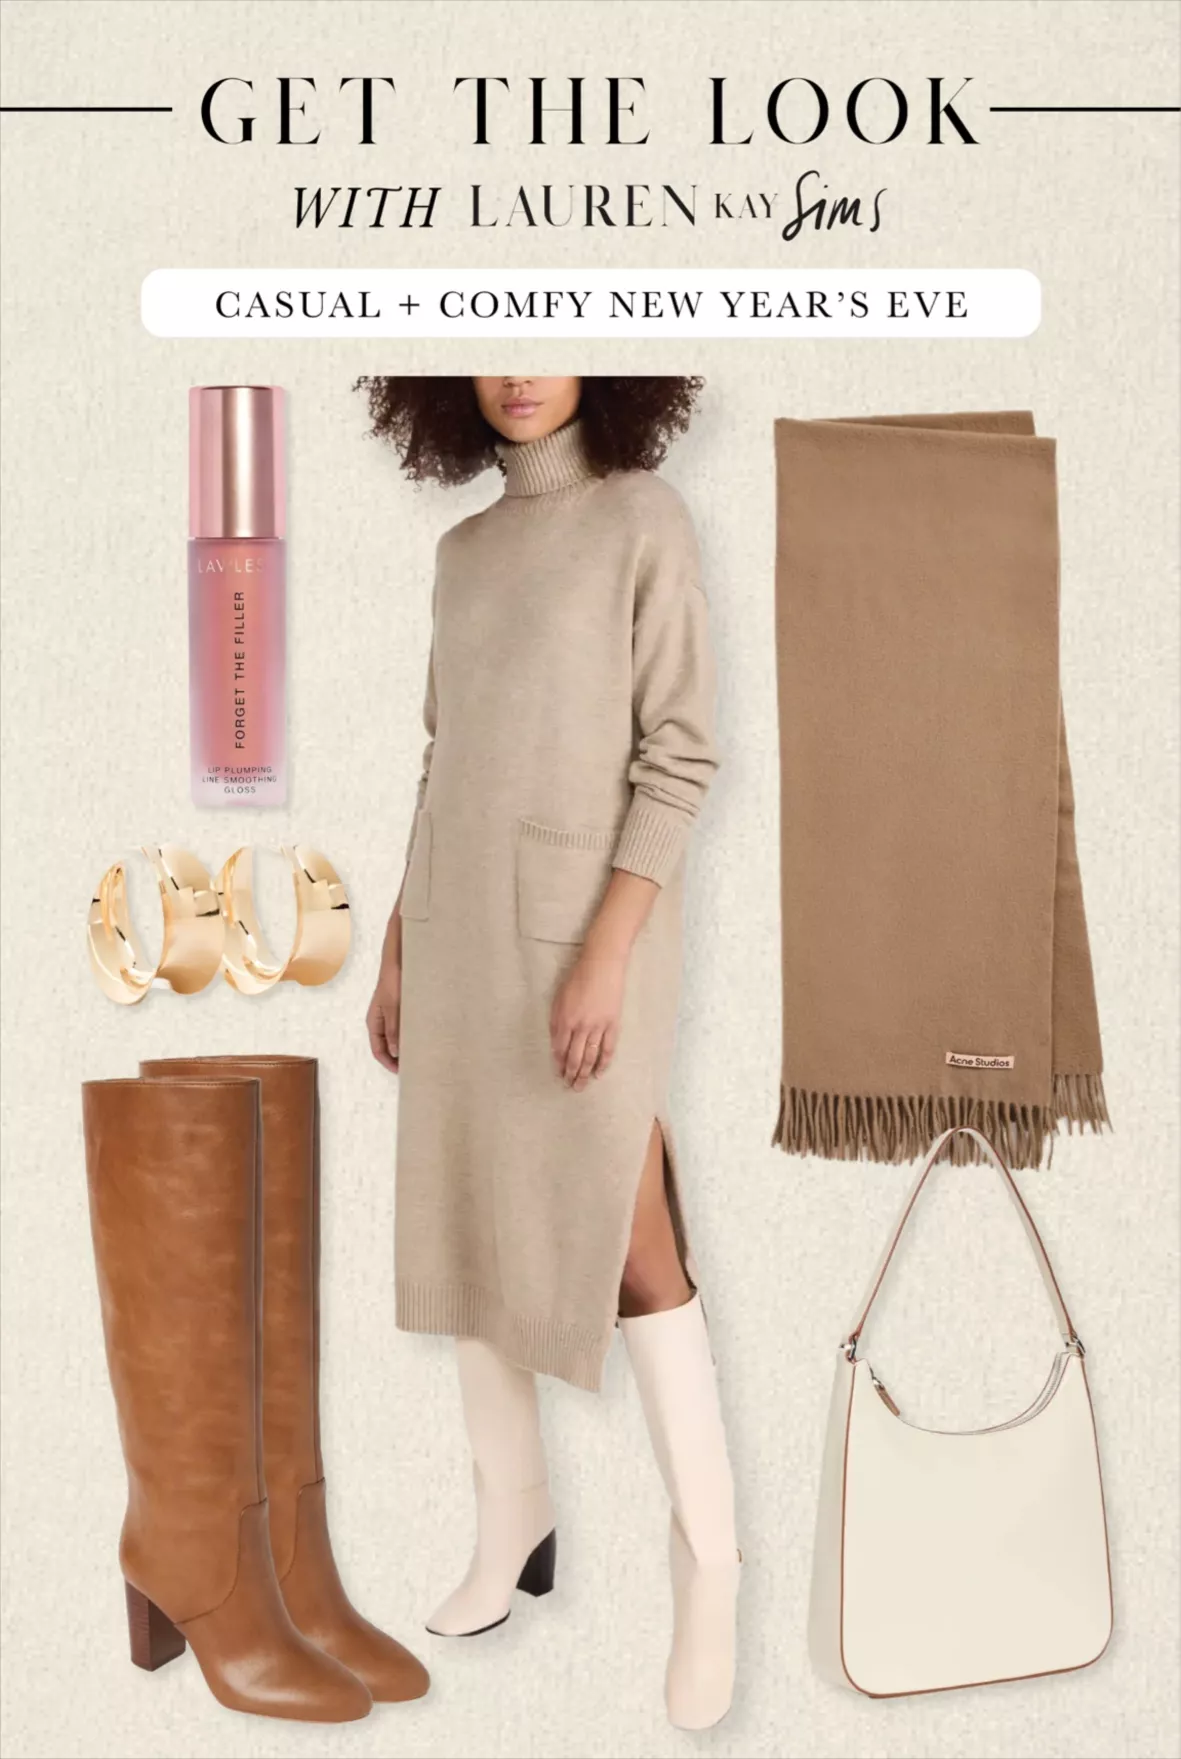 holiday party outfit inspo - Lauren Kay Sims